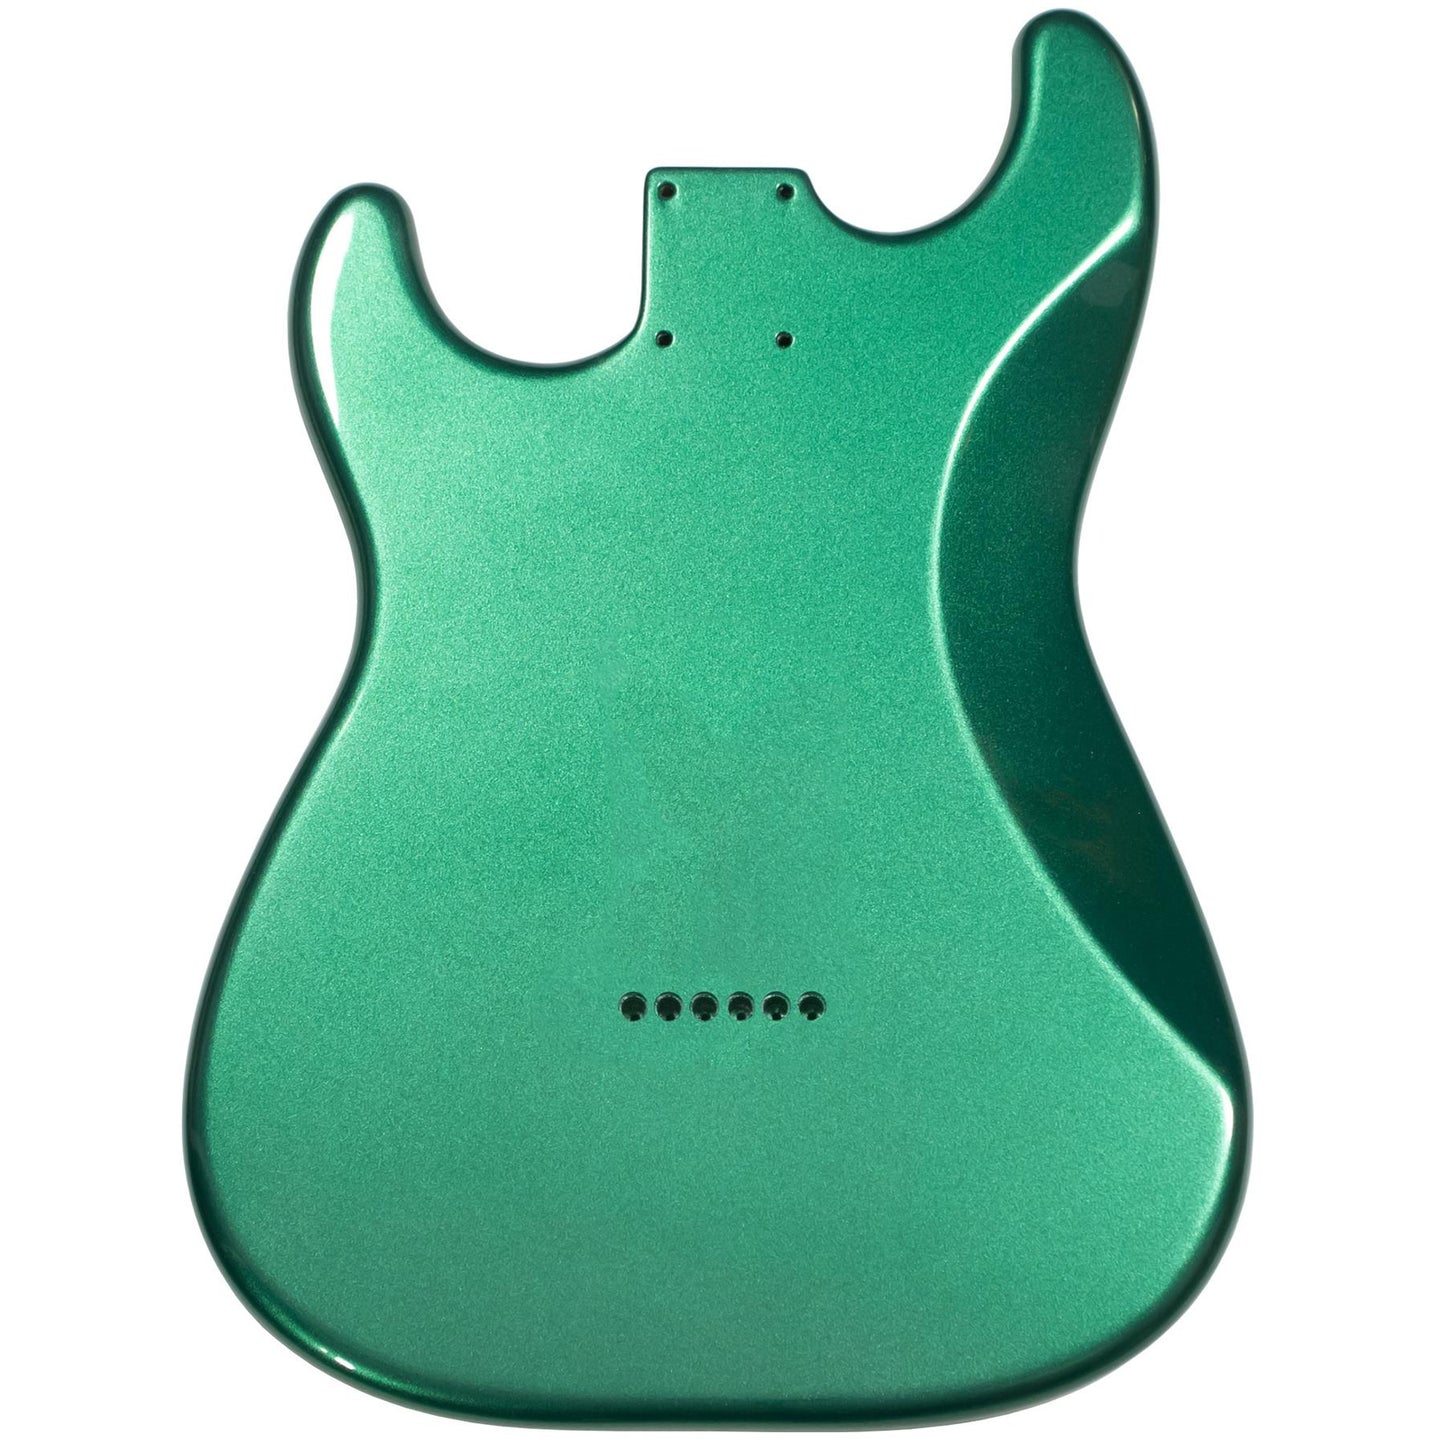 Stratocaster Compatible Body Hardtail - Sherwood Green